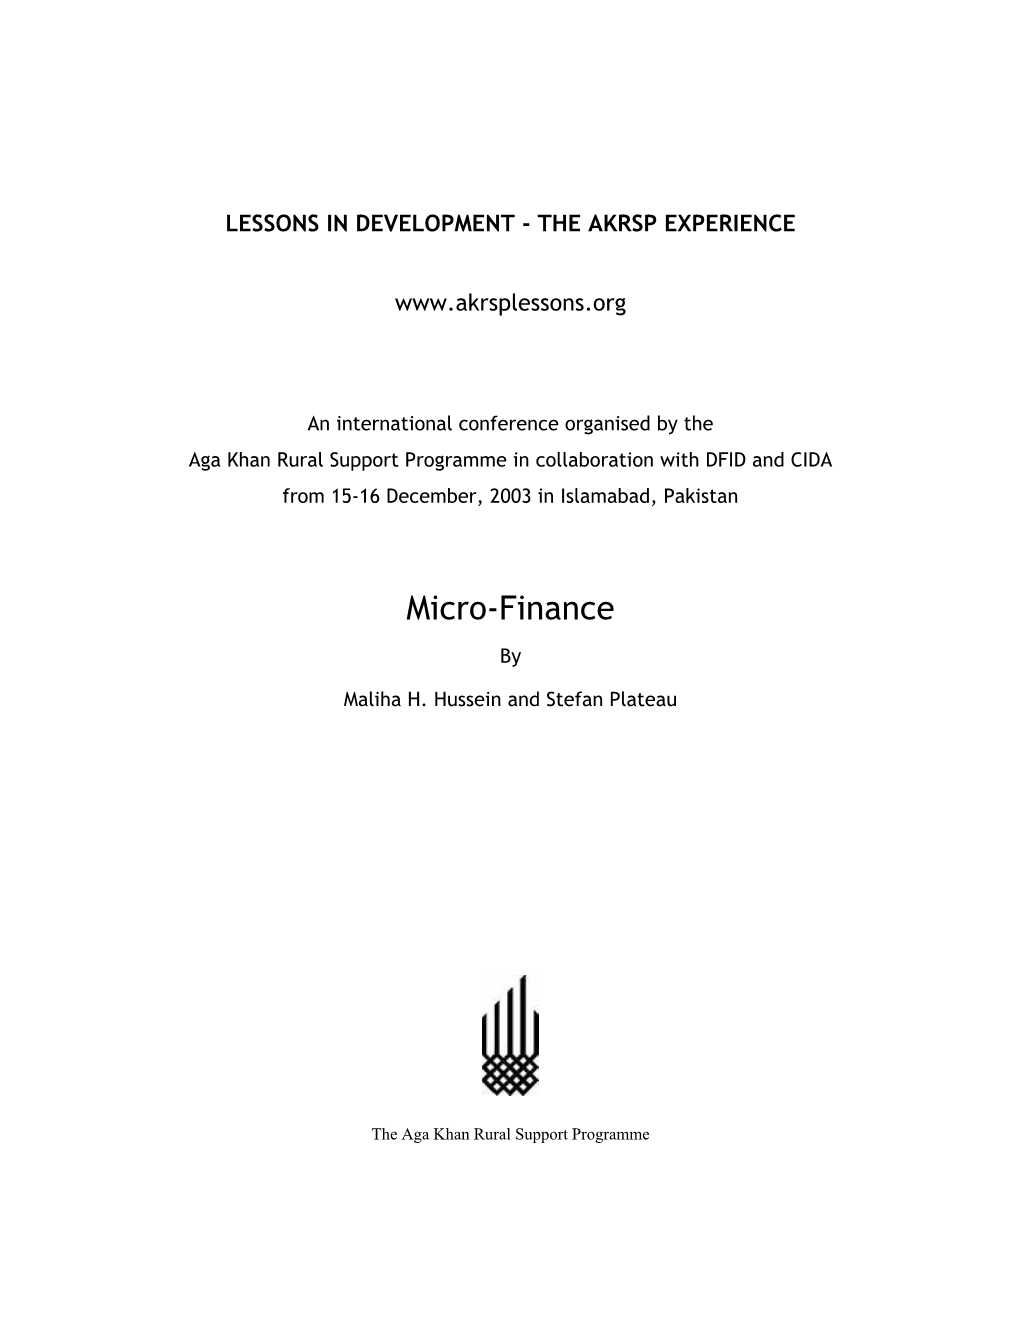 The Lessons in Development: the AKRSP Experience